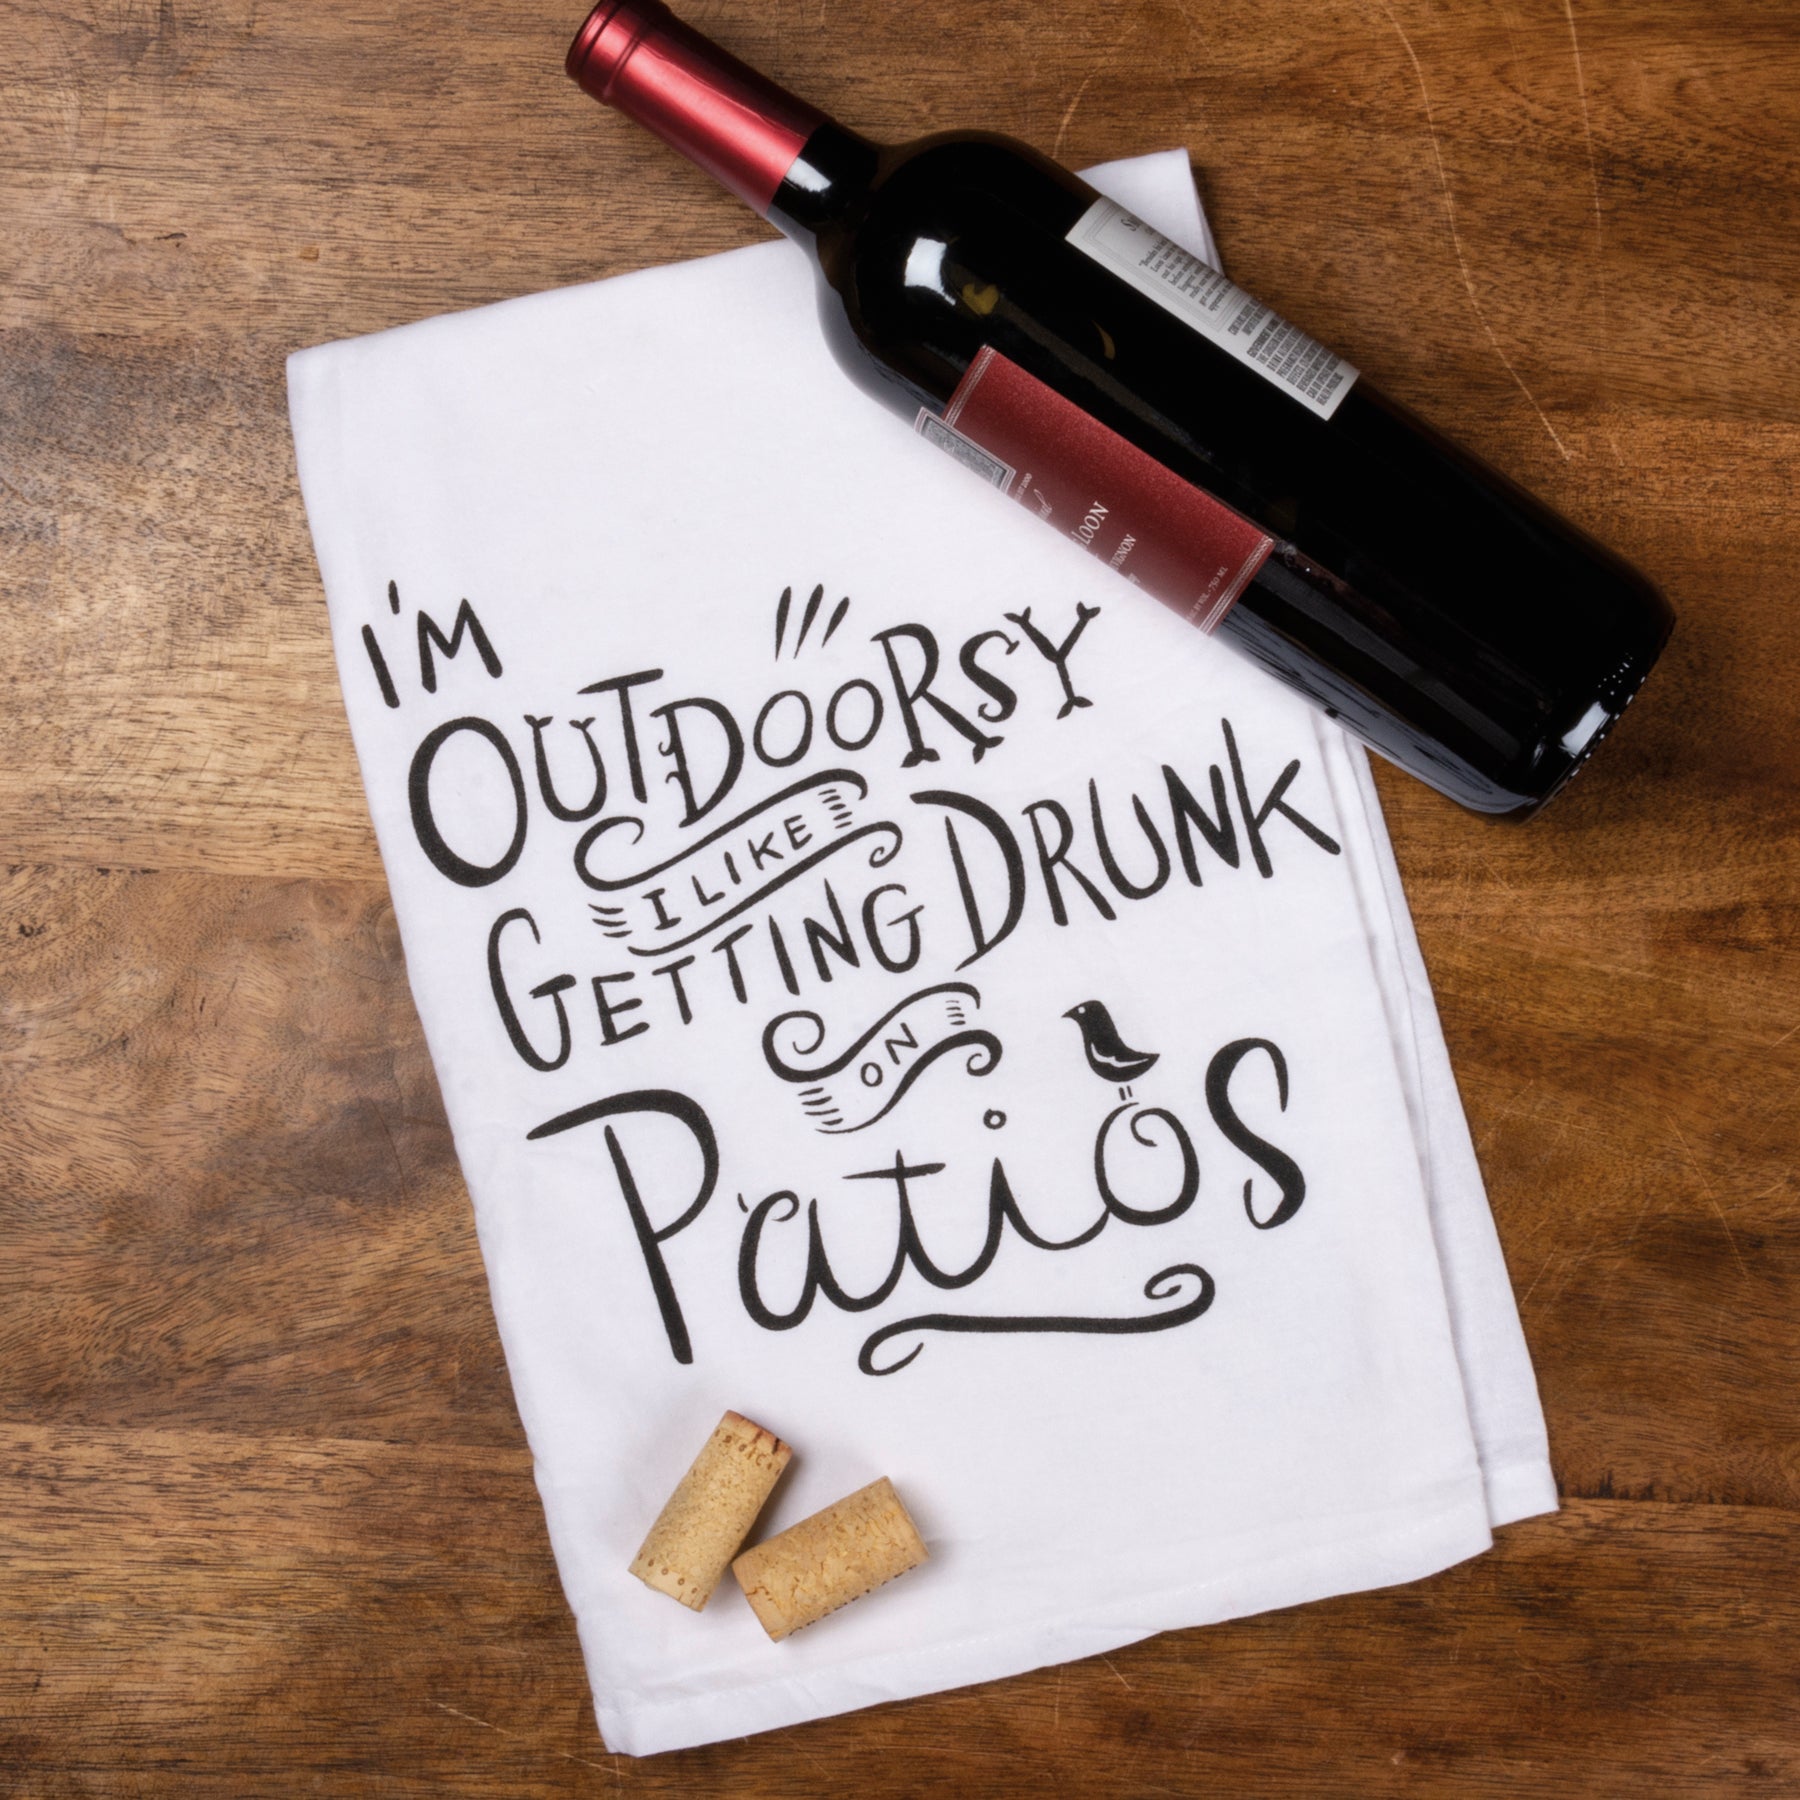 'I'm Outdoorsy, I Like Getting Drunk On Patios' Kitchen Towel